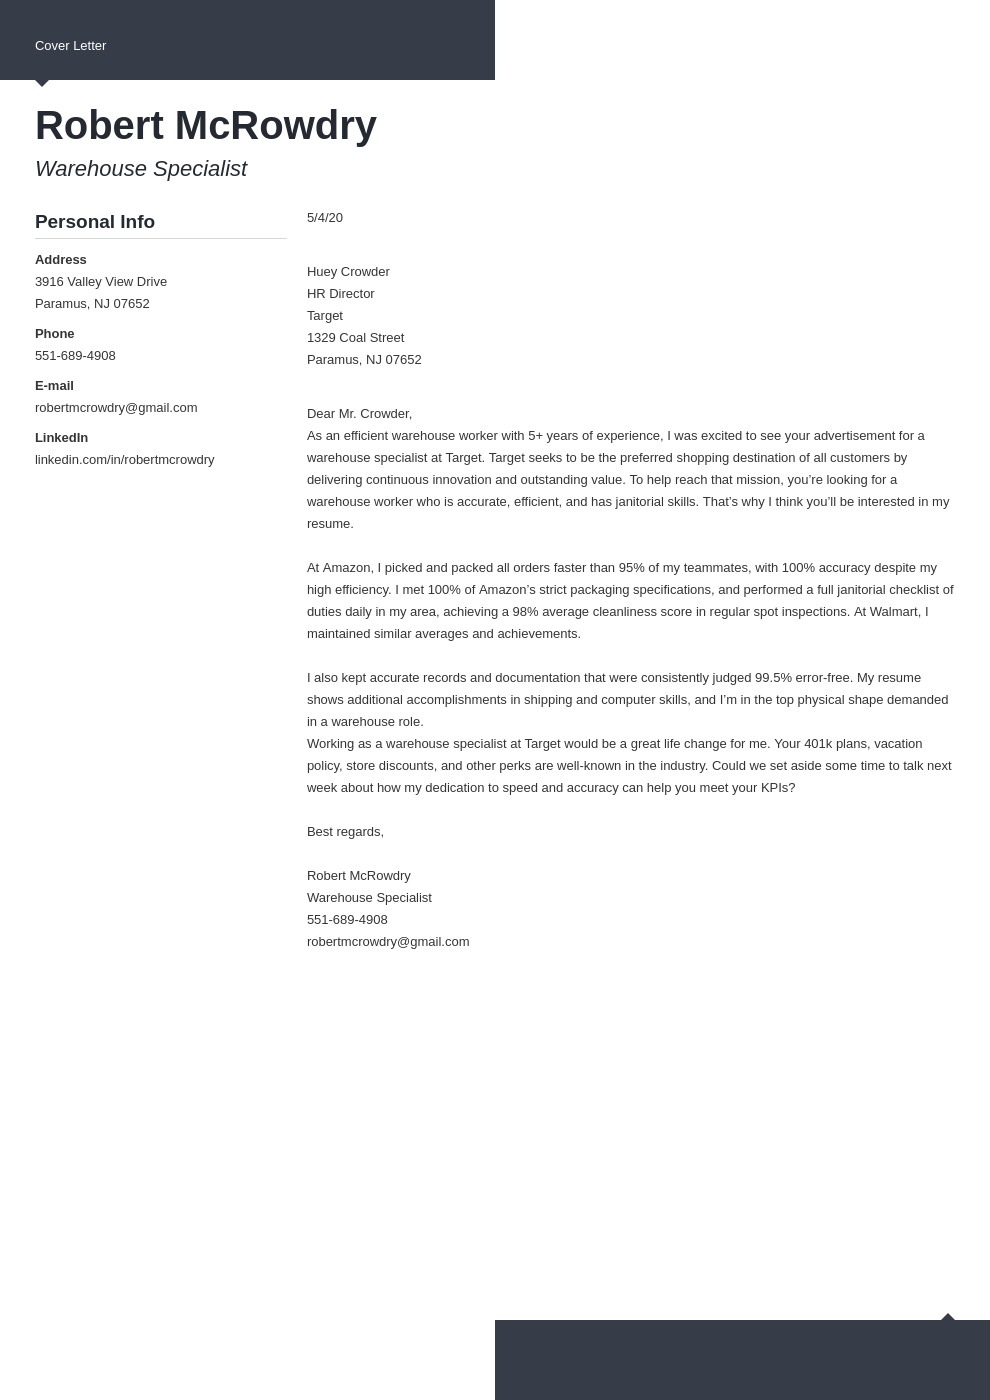 Warehouse Cover Letter Examples for Workers and Associates